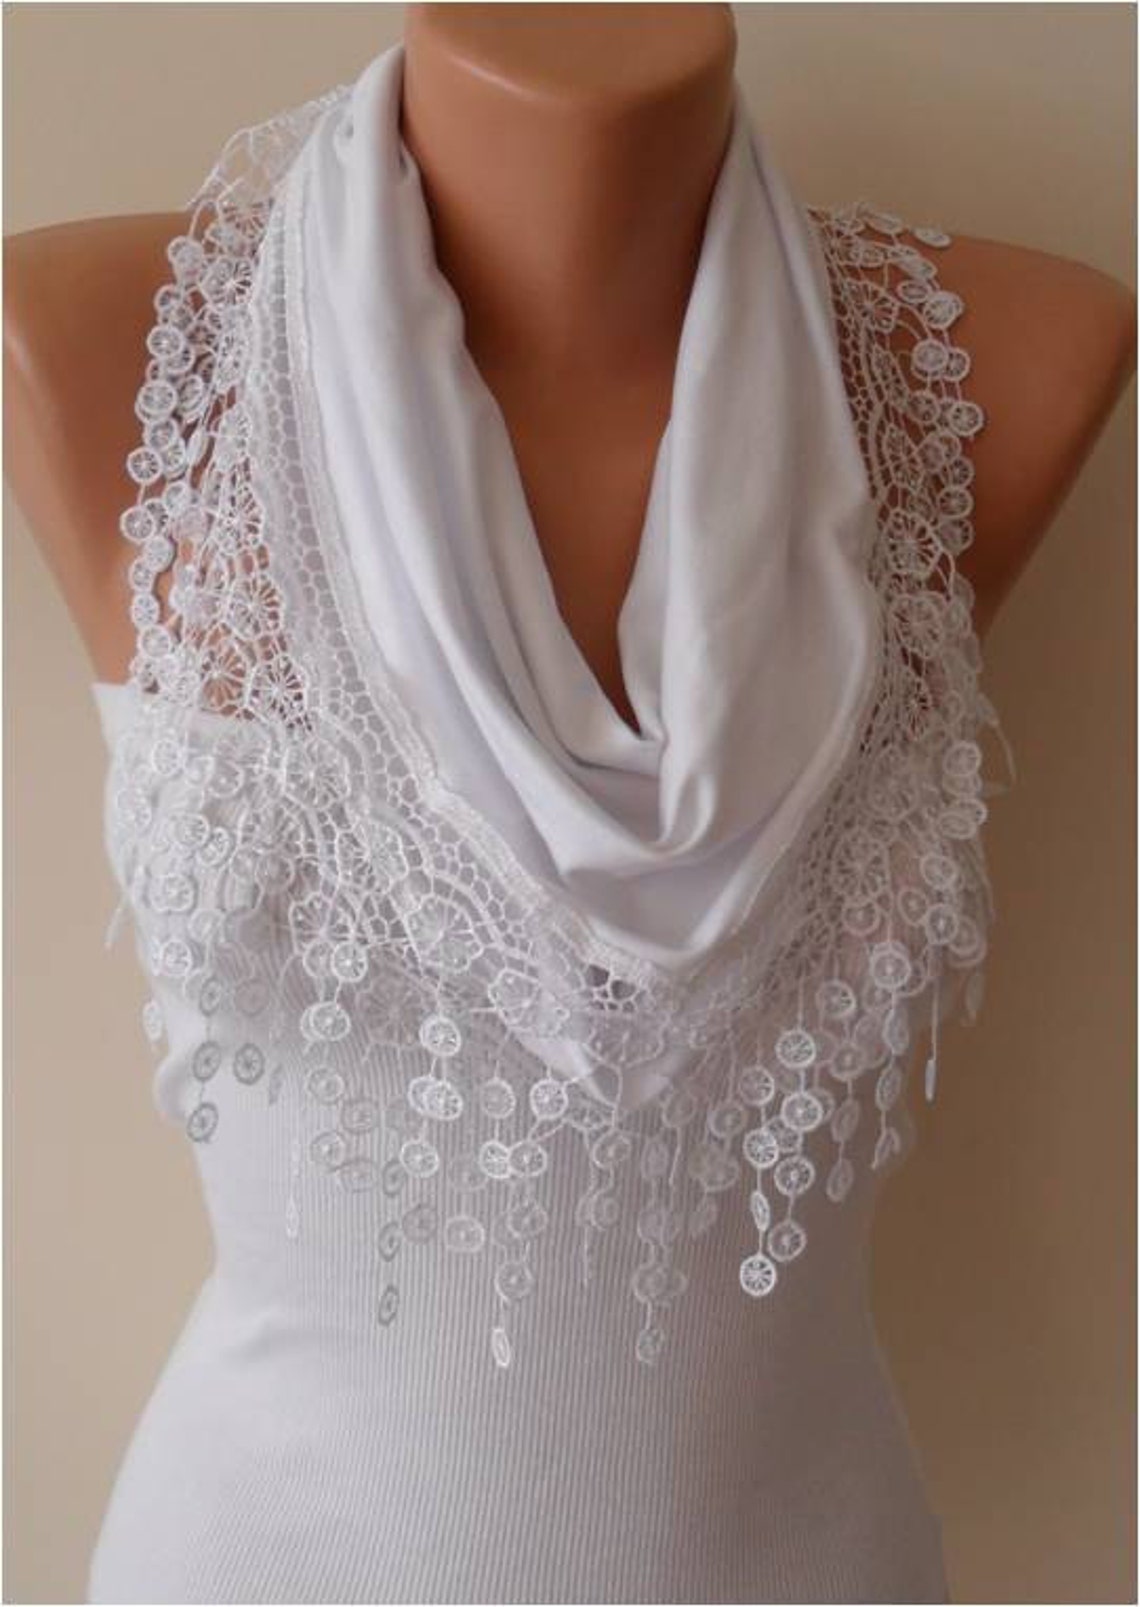 White Cotton Lace Scarf for Women Wrap Shawl Gift for Her - Etsy